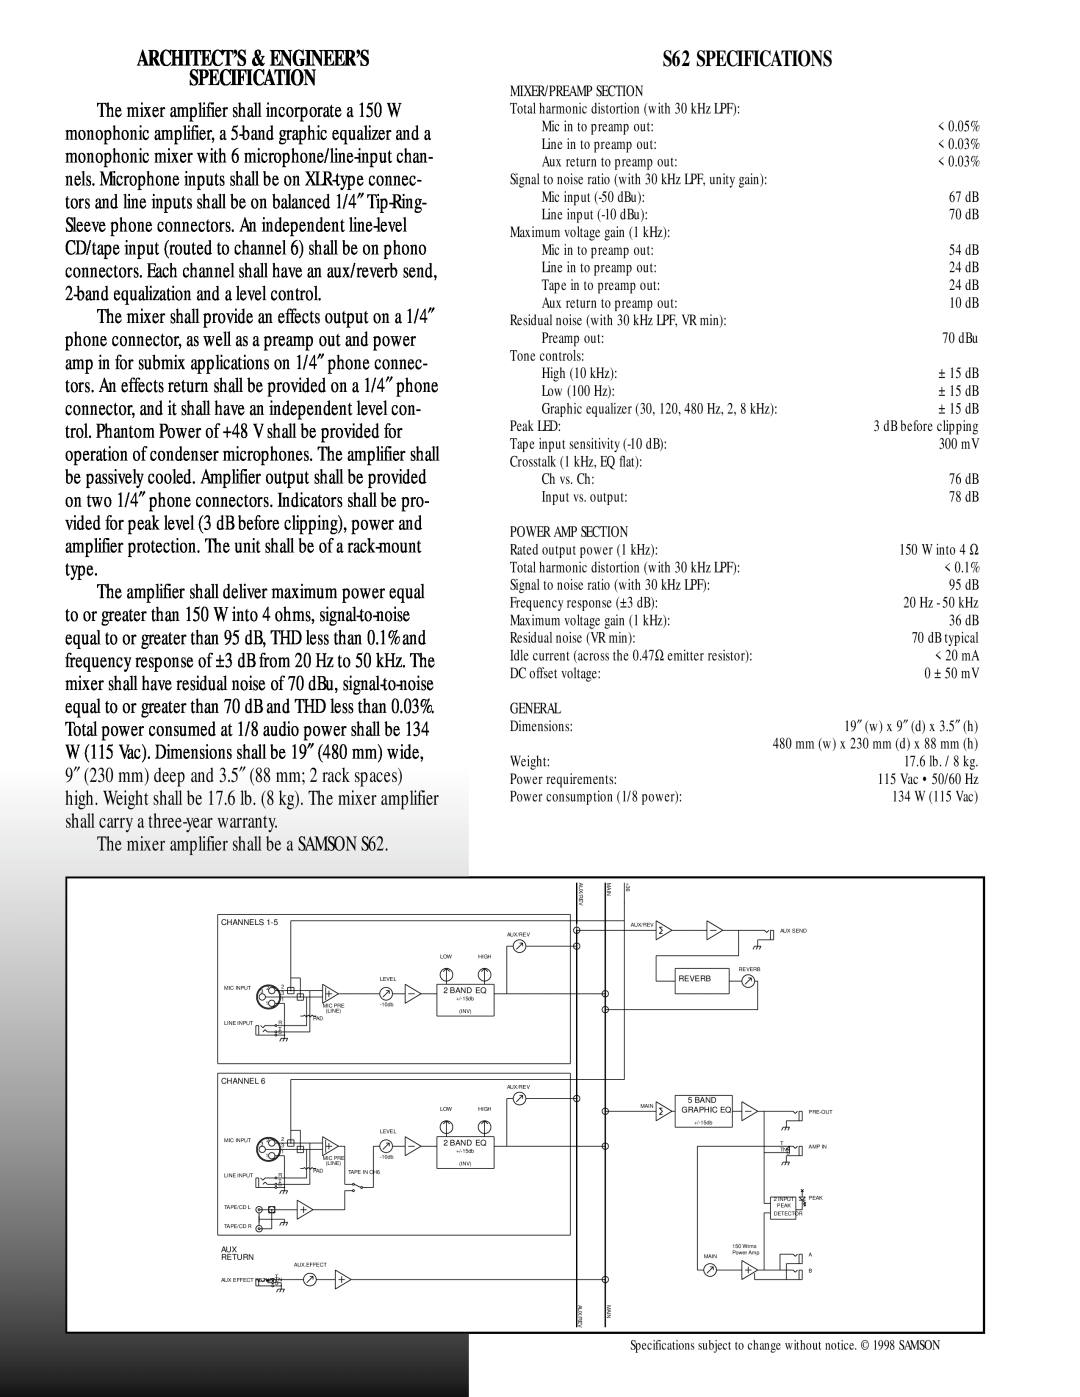 Samson manual Architect’S & Engineer’S Specification, S62 SPECIFICATIONS, The mixer amplifier shall be a SAMSON S62 